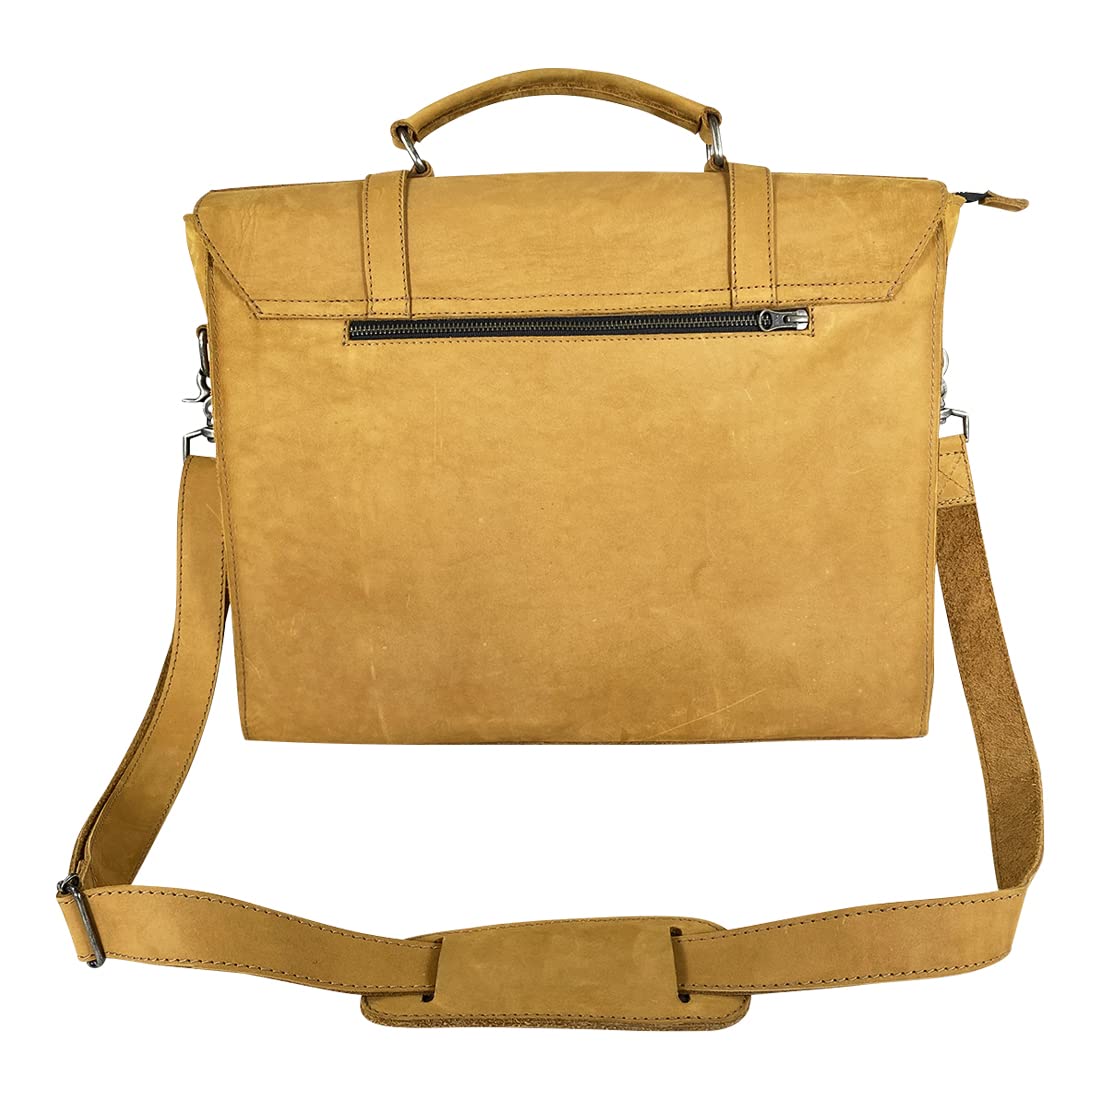 Weatherproof Leather, Messenger Bag Handmade from Suede Leather with Plaid Cotton Lining - Briefcase for Storing Computer, Books, with Zipper Closure, Adjustable Crossbody Strap - Old Tobacco